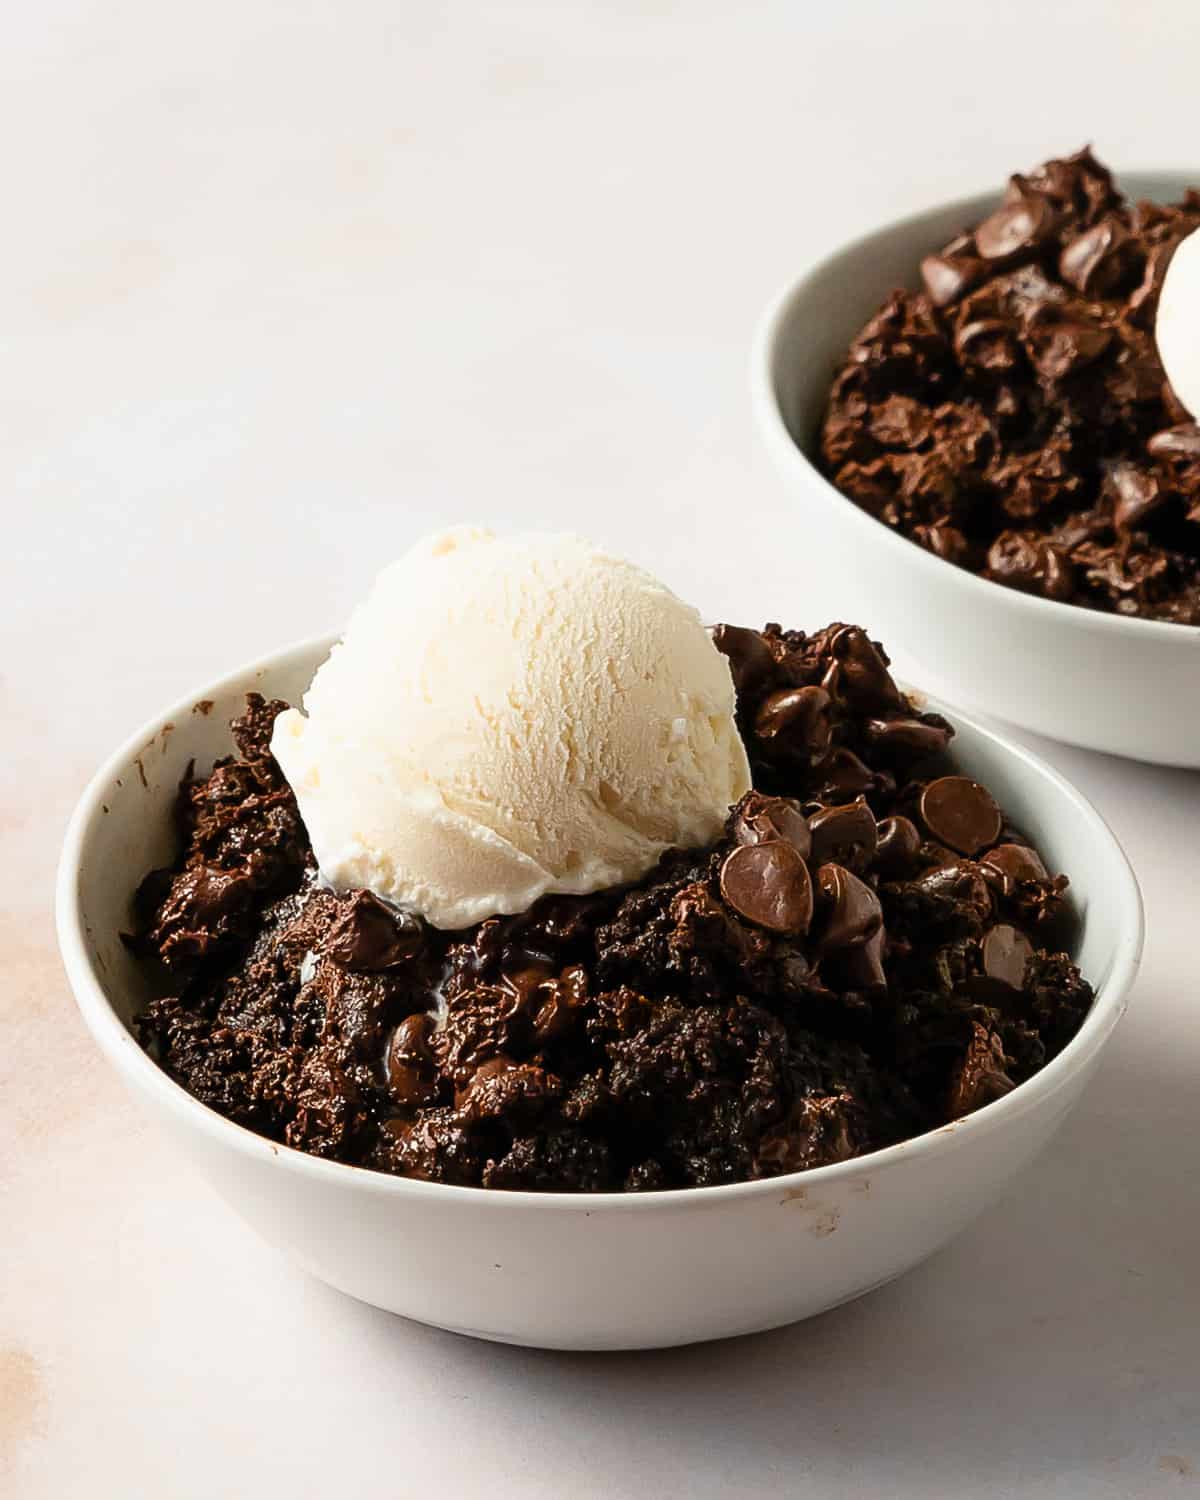 Chocolate dump cake is a quick, easy to make and rich chocolate dessert. This chocolate dump cake recipe is made from moist chocolate cake mix, creamy chocolate pudding and sweet chocolate chips. Top this decadent chocolate pudding dump cake with cold vanilla ice cream for the perfect dessert.